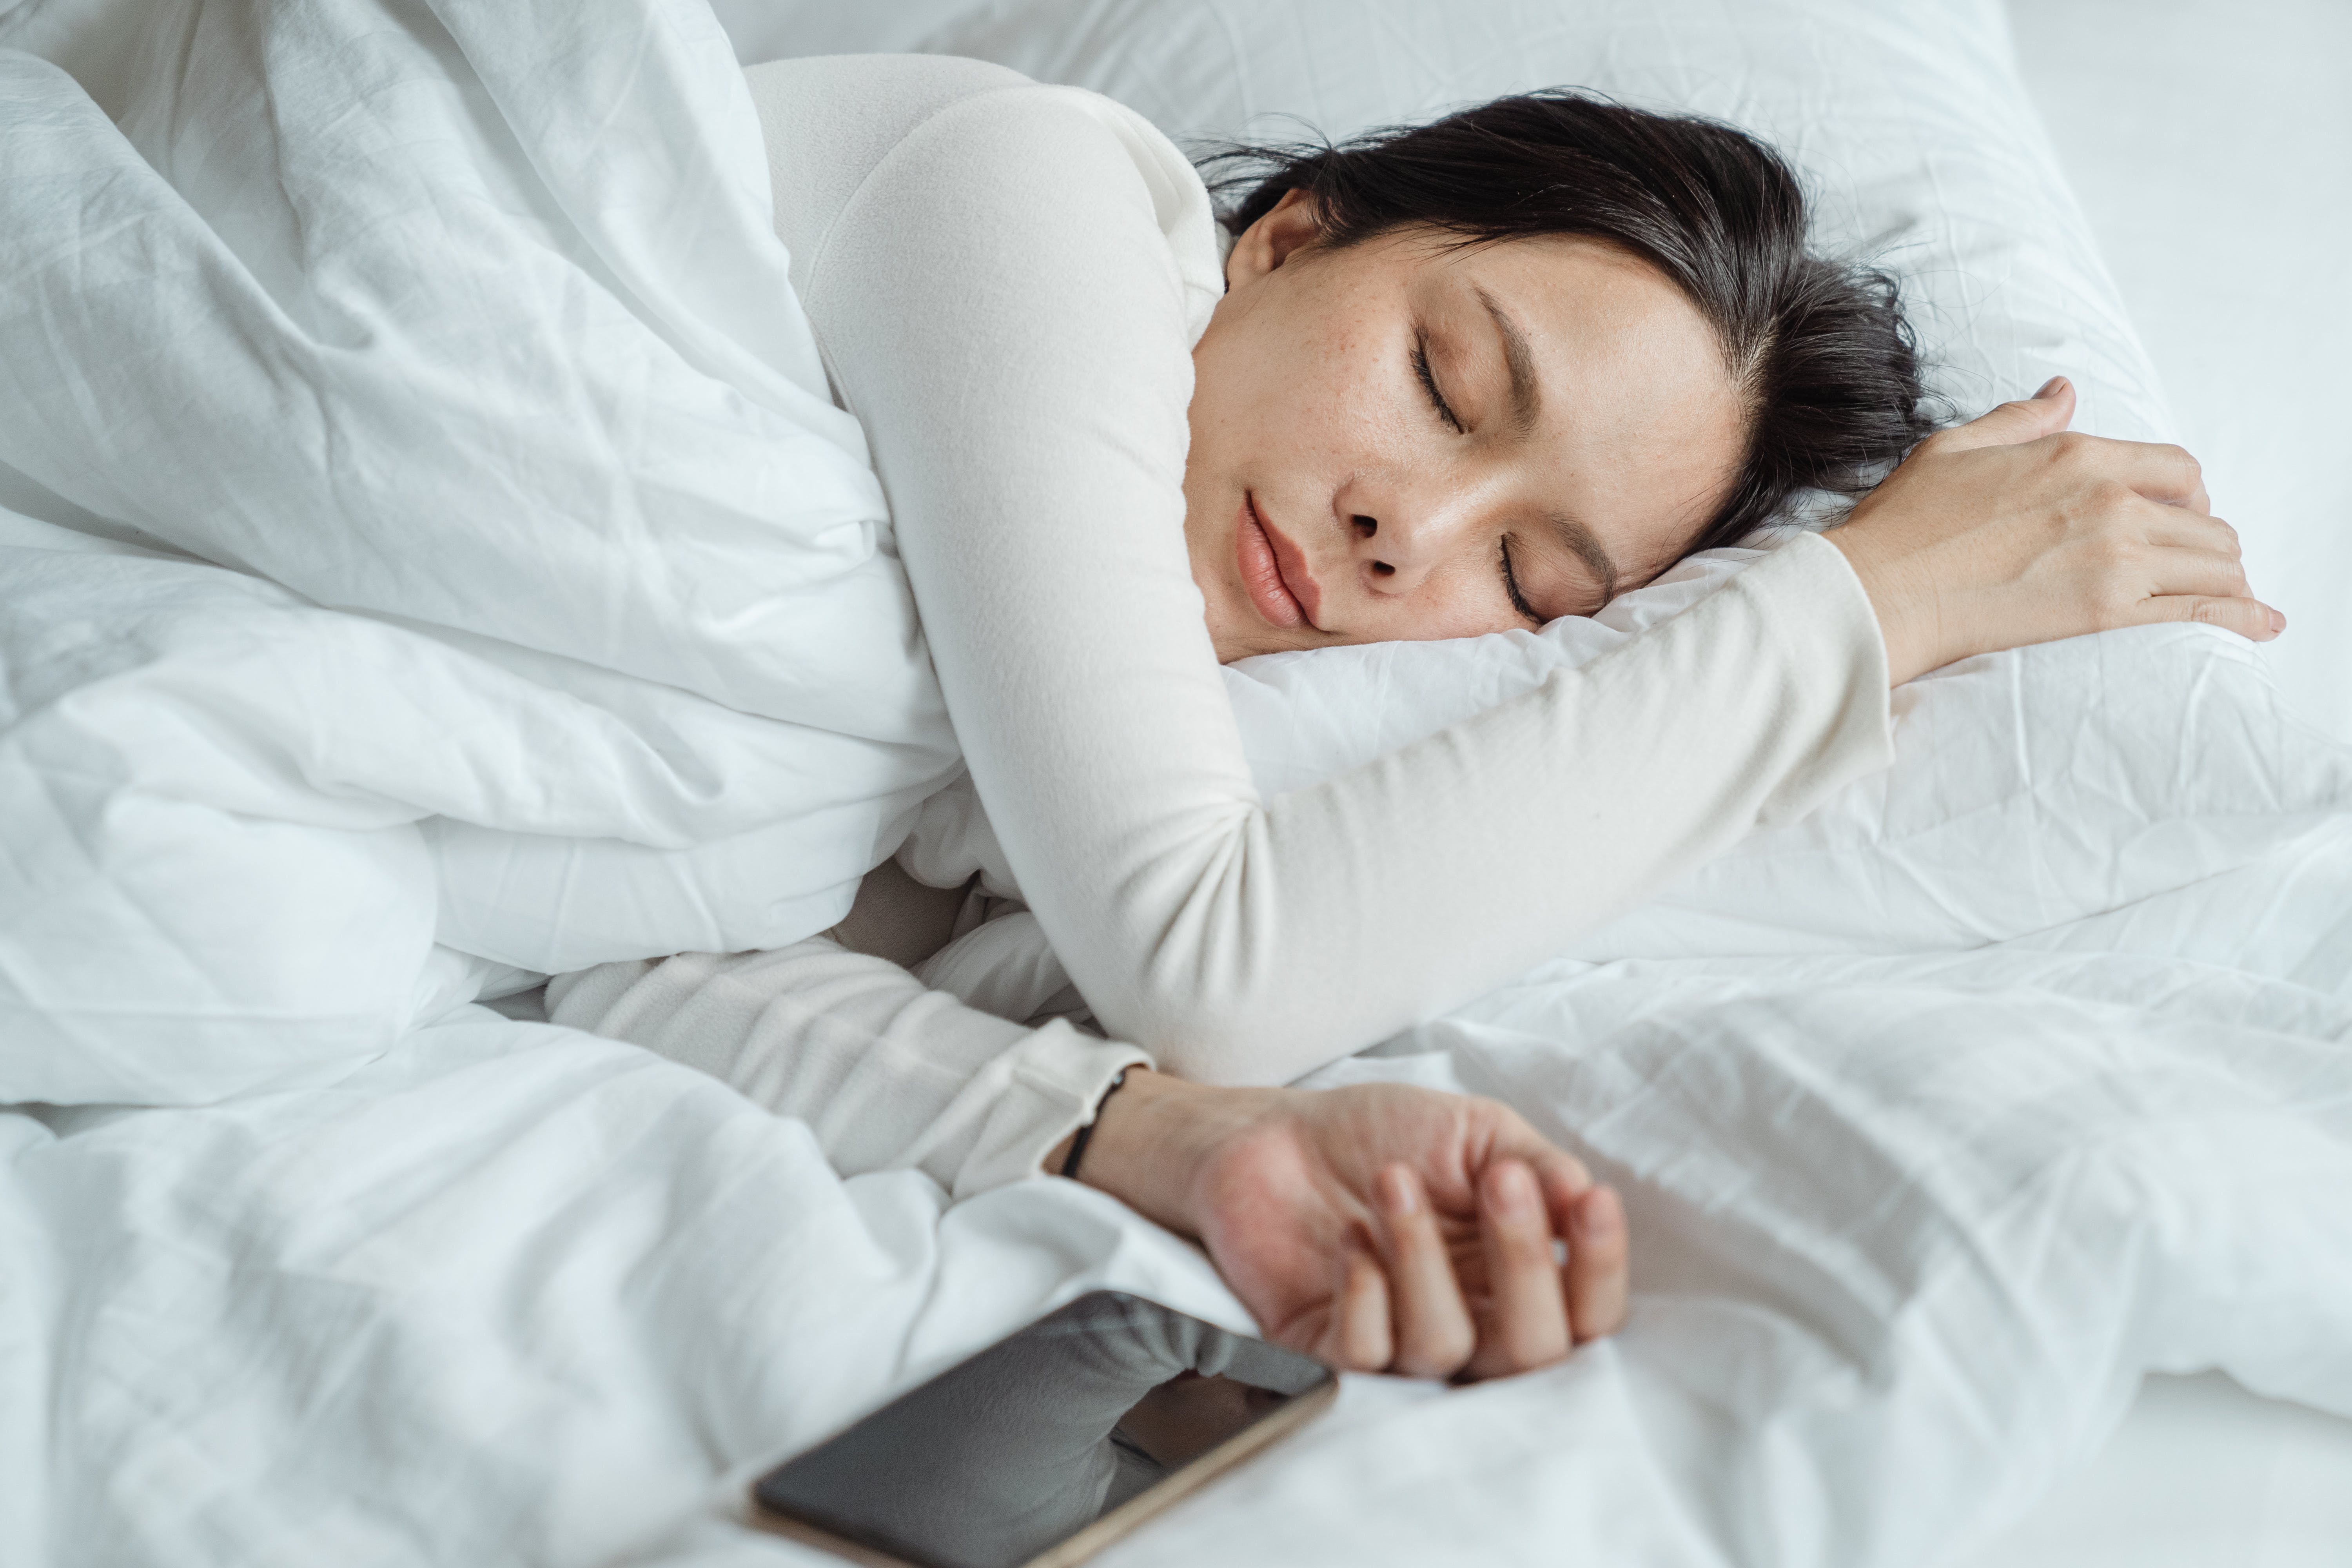 Sleep & Depression: Temporary Relief Comes at a Cost